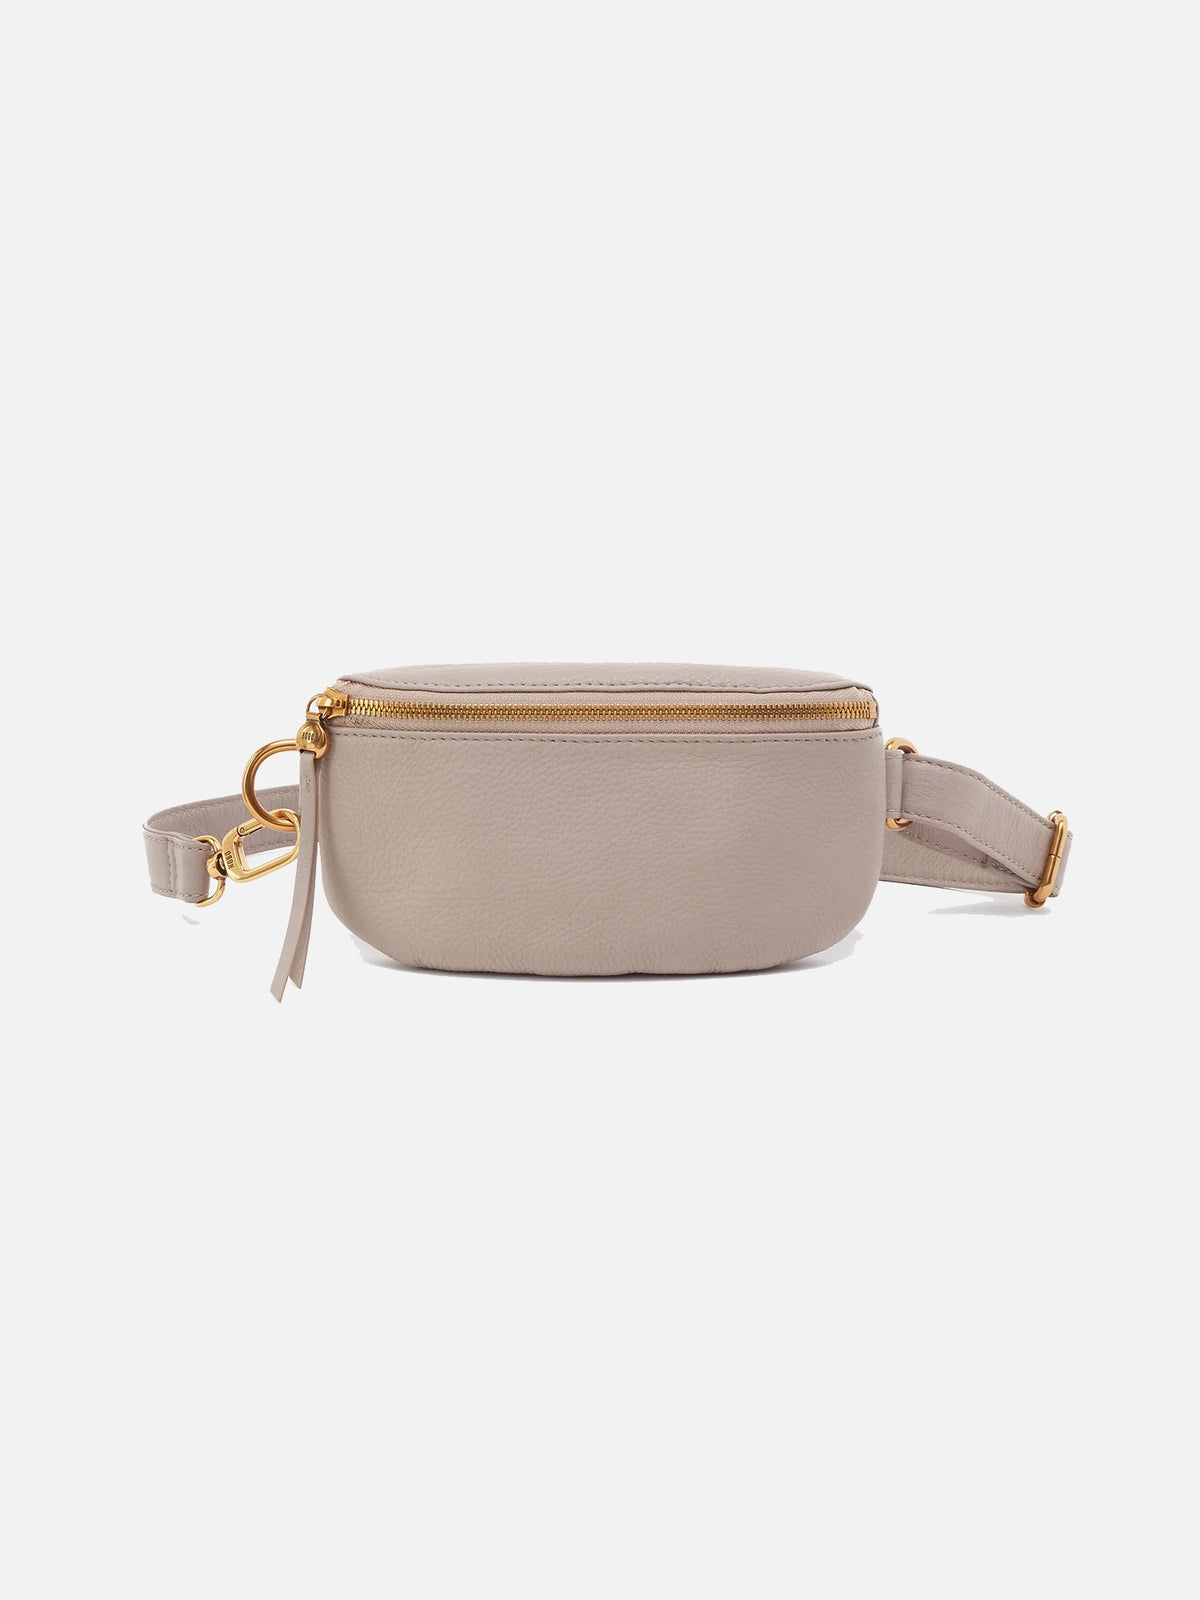 hobo fern belt bag in taupe pebbled leather